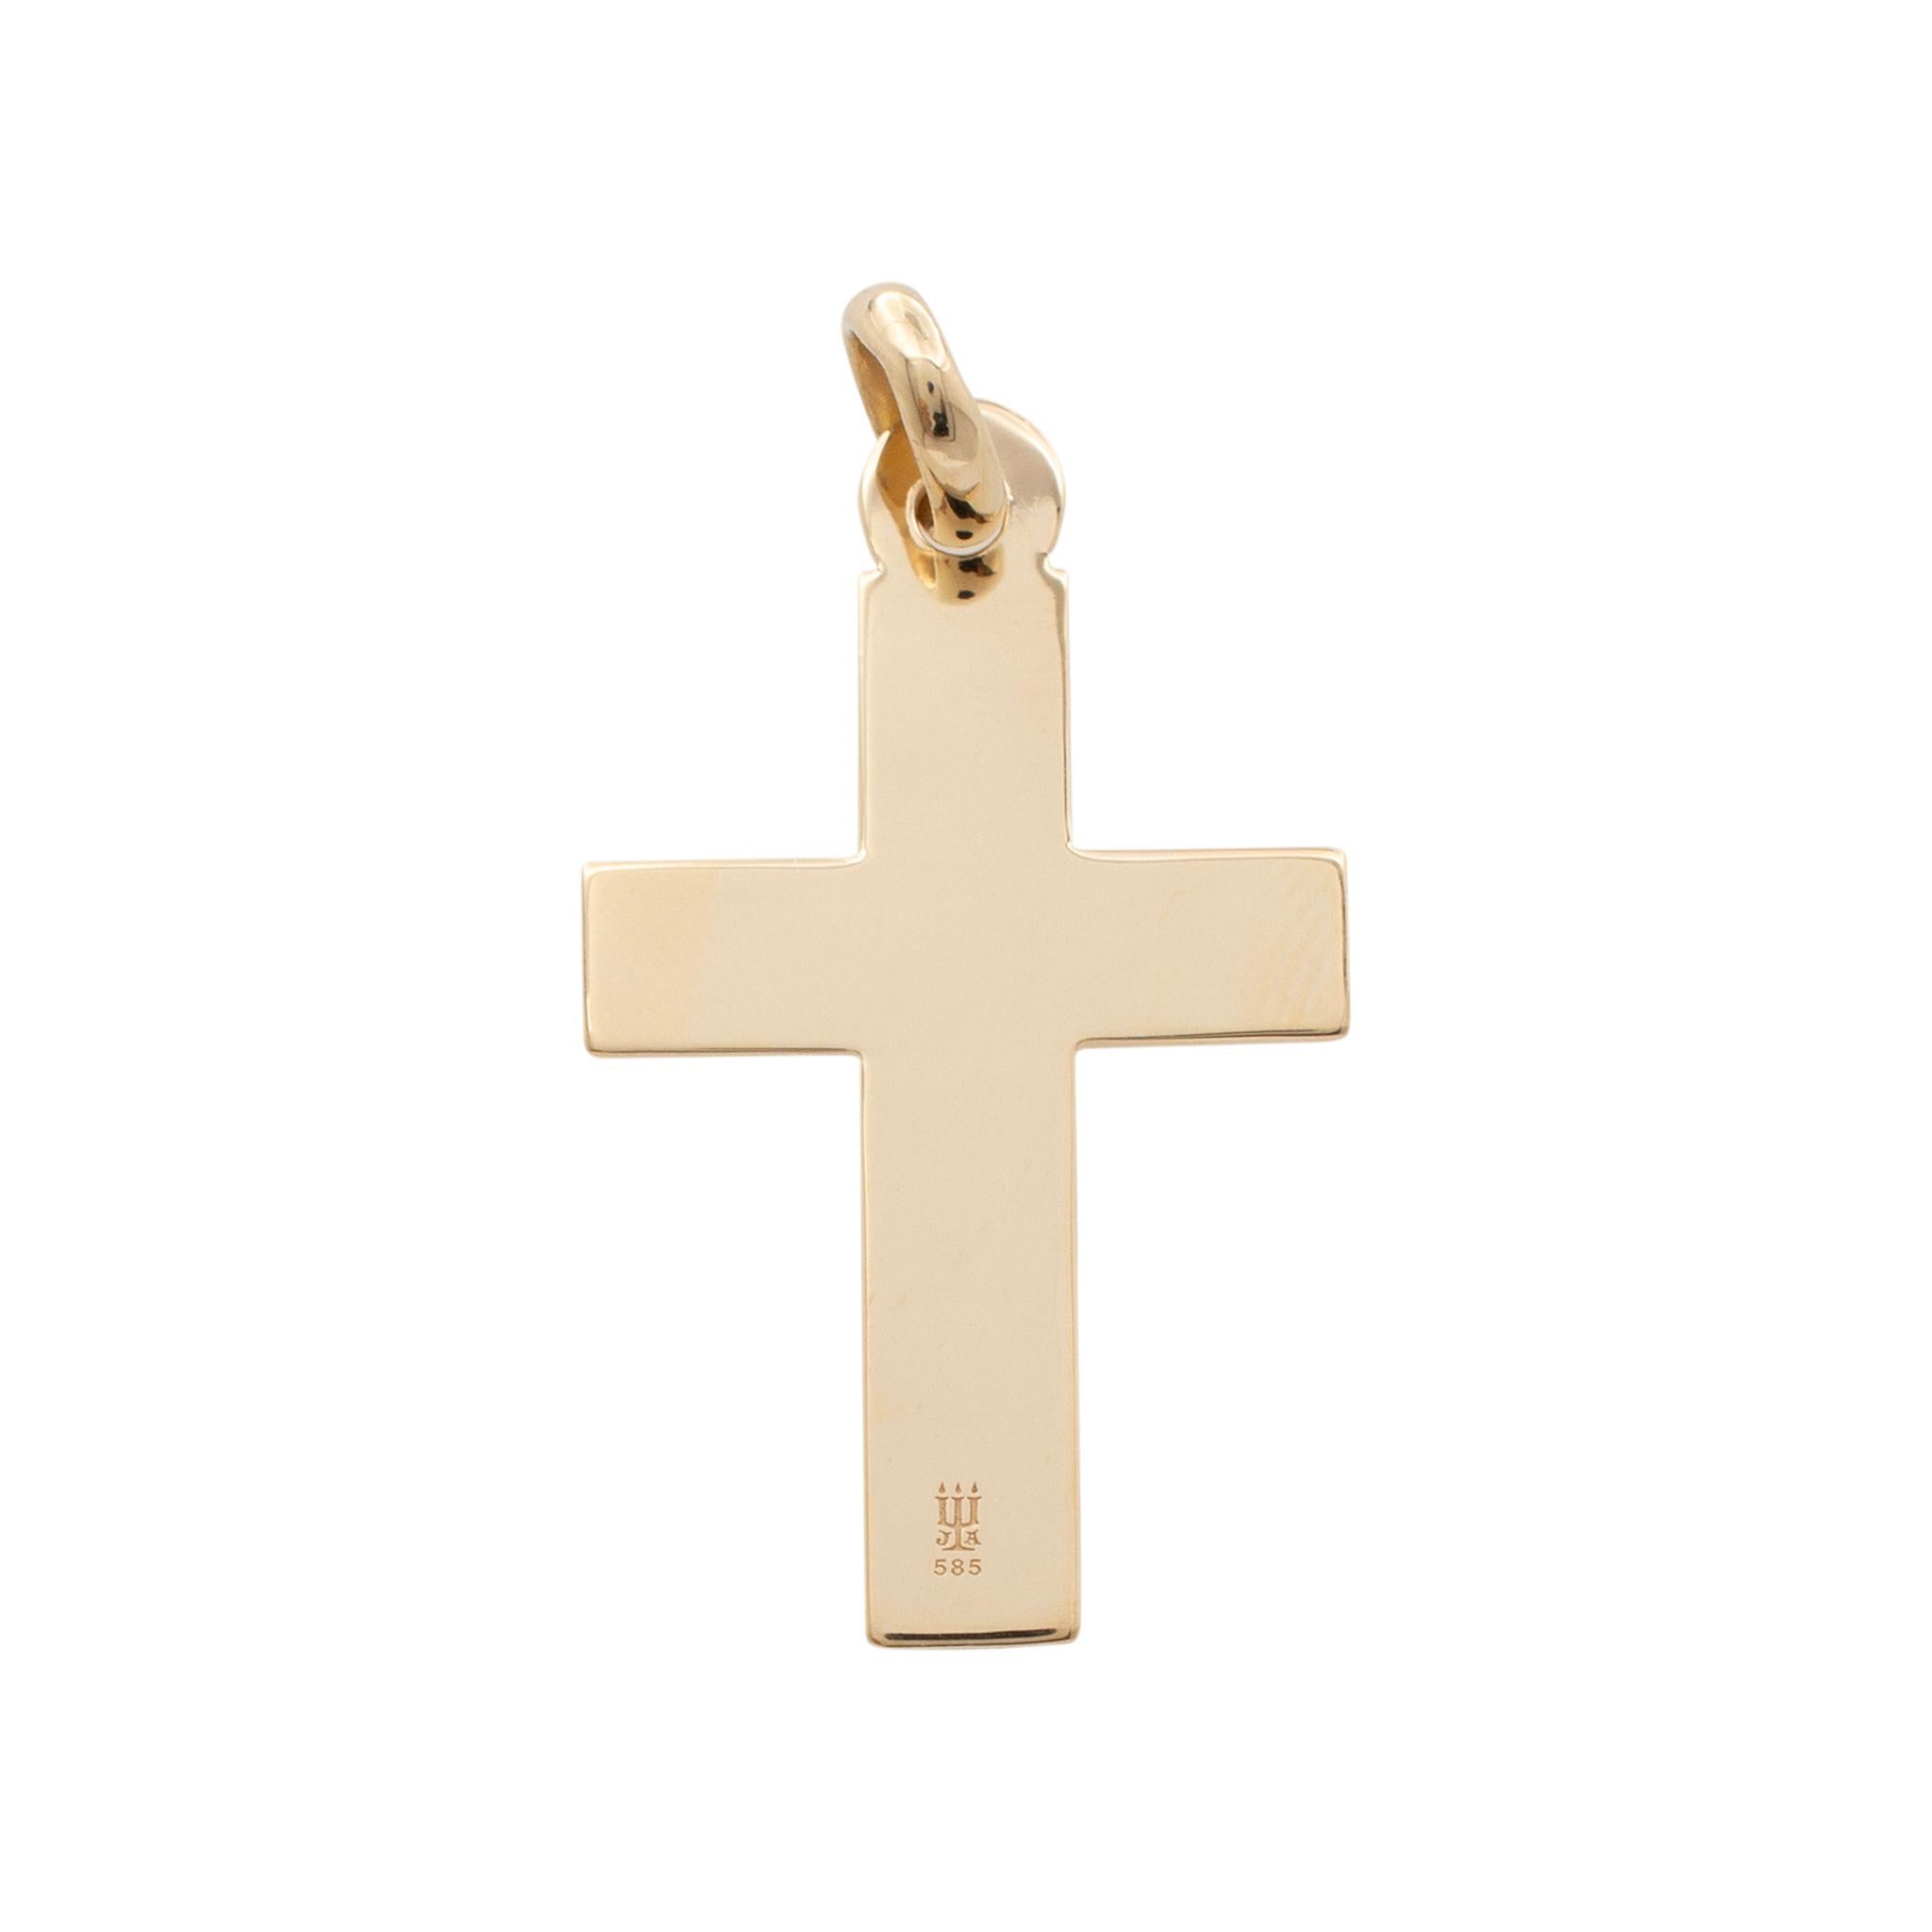 Brand: James Avery

Gender: Unisex

Metal Type: 14K Yellow Gold

Length: 1.25 Inches

Width: 21.70 mm

Weight: 5.49 Grams

14K yellow gold religious cross pendant. The metal was tested and determined to be 14K yellow gold. Engraved with 